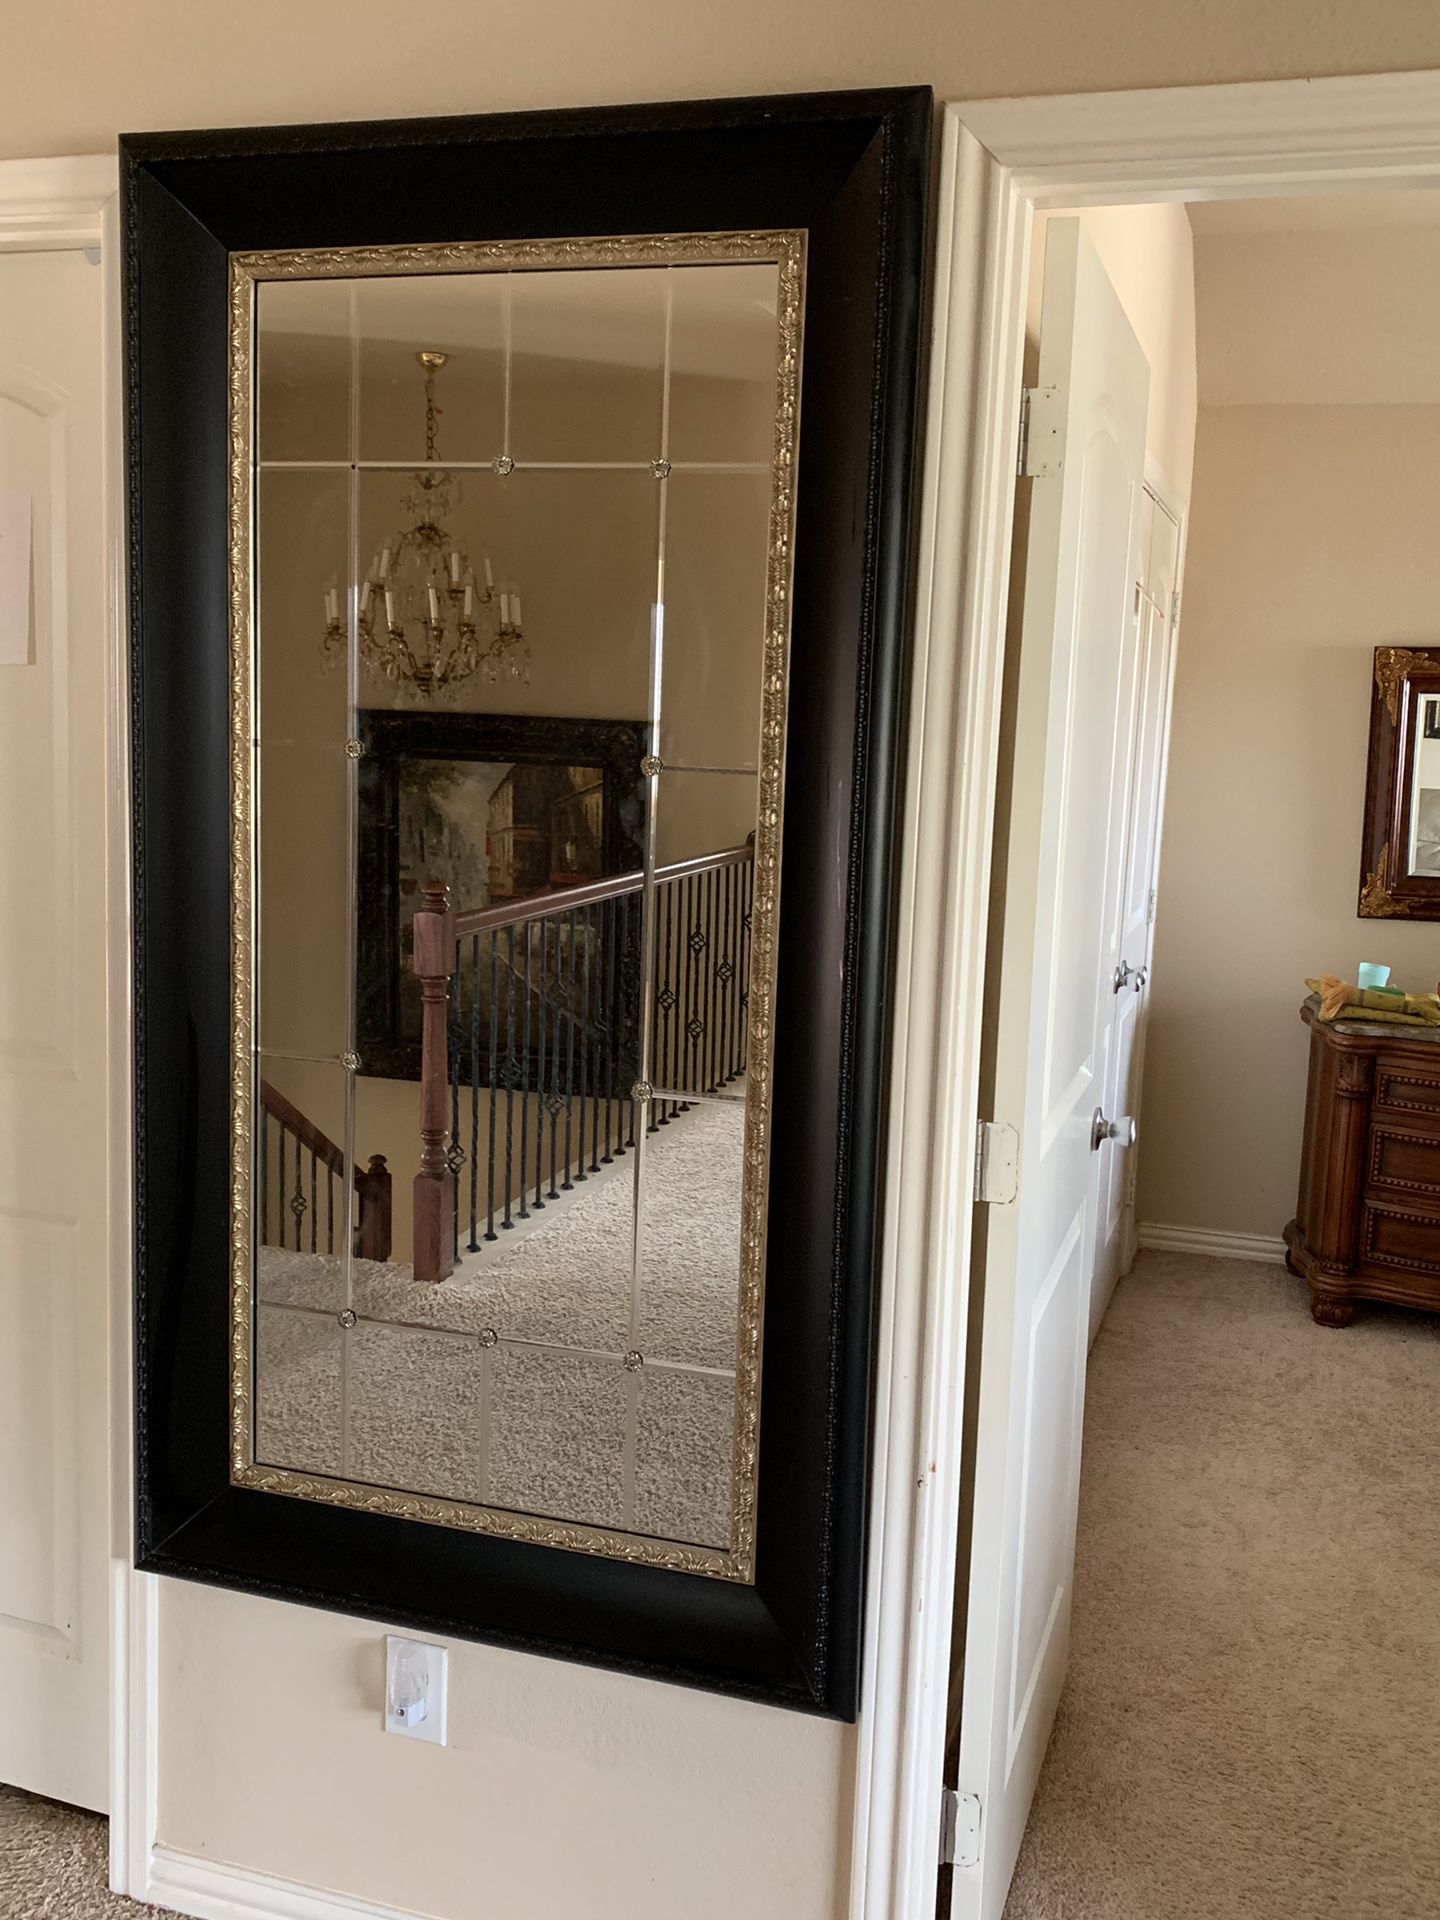 Framed mirror with metal flower inserts